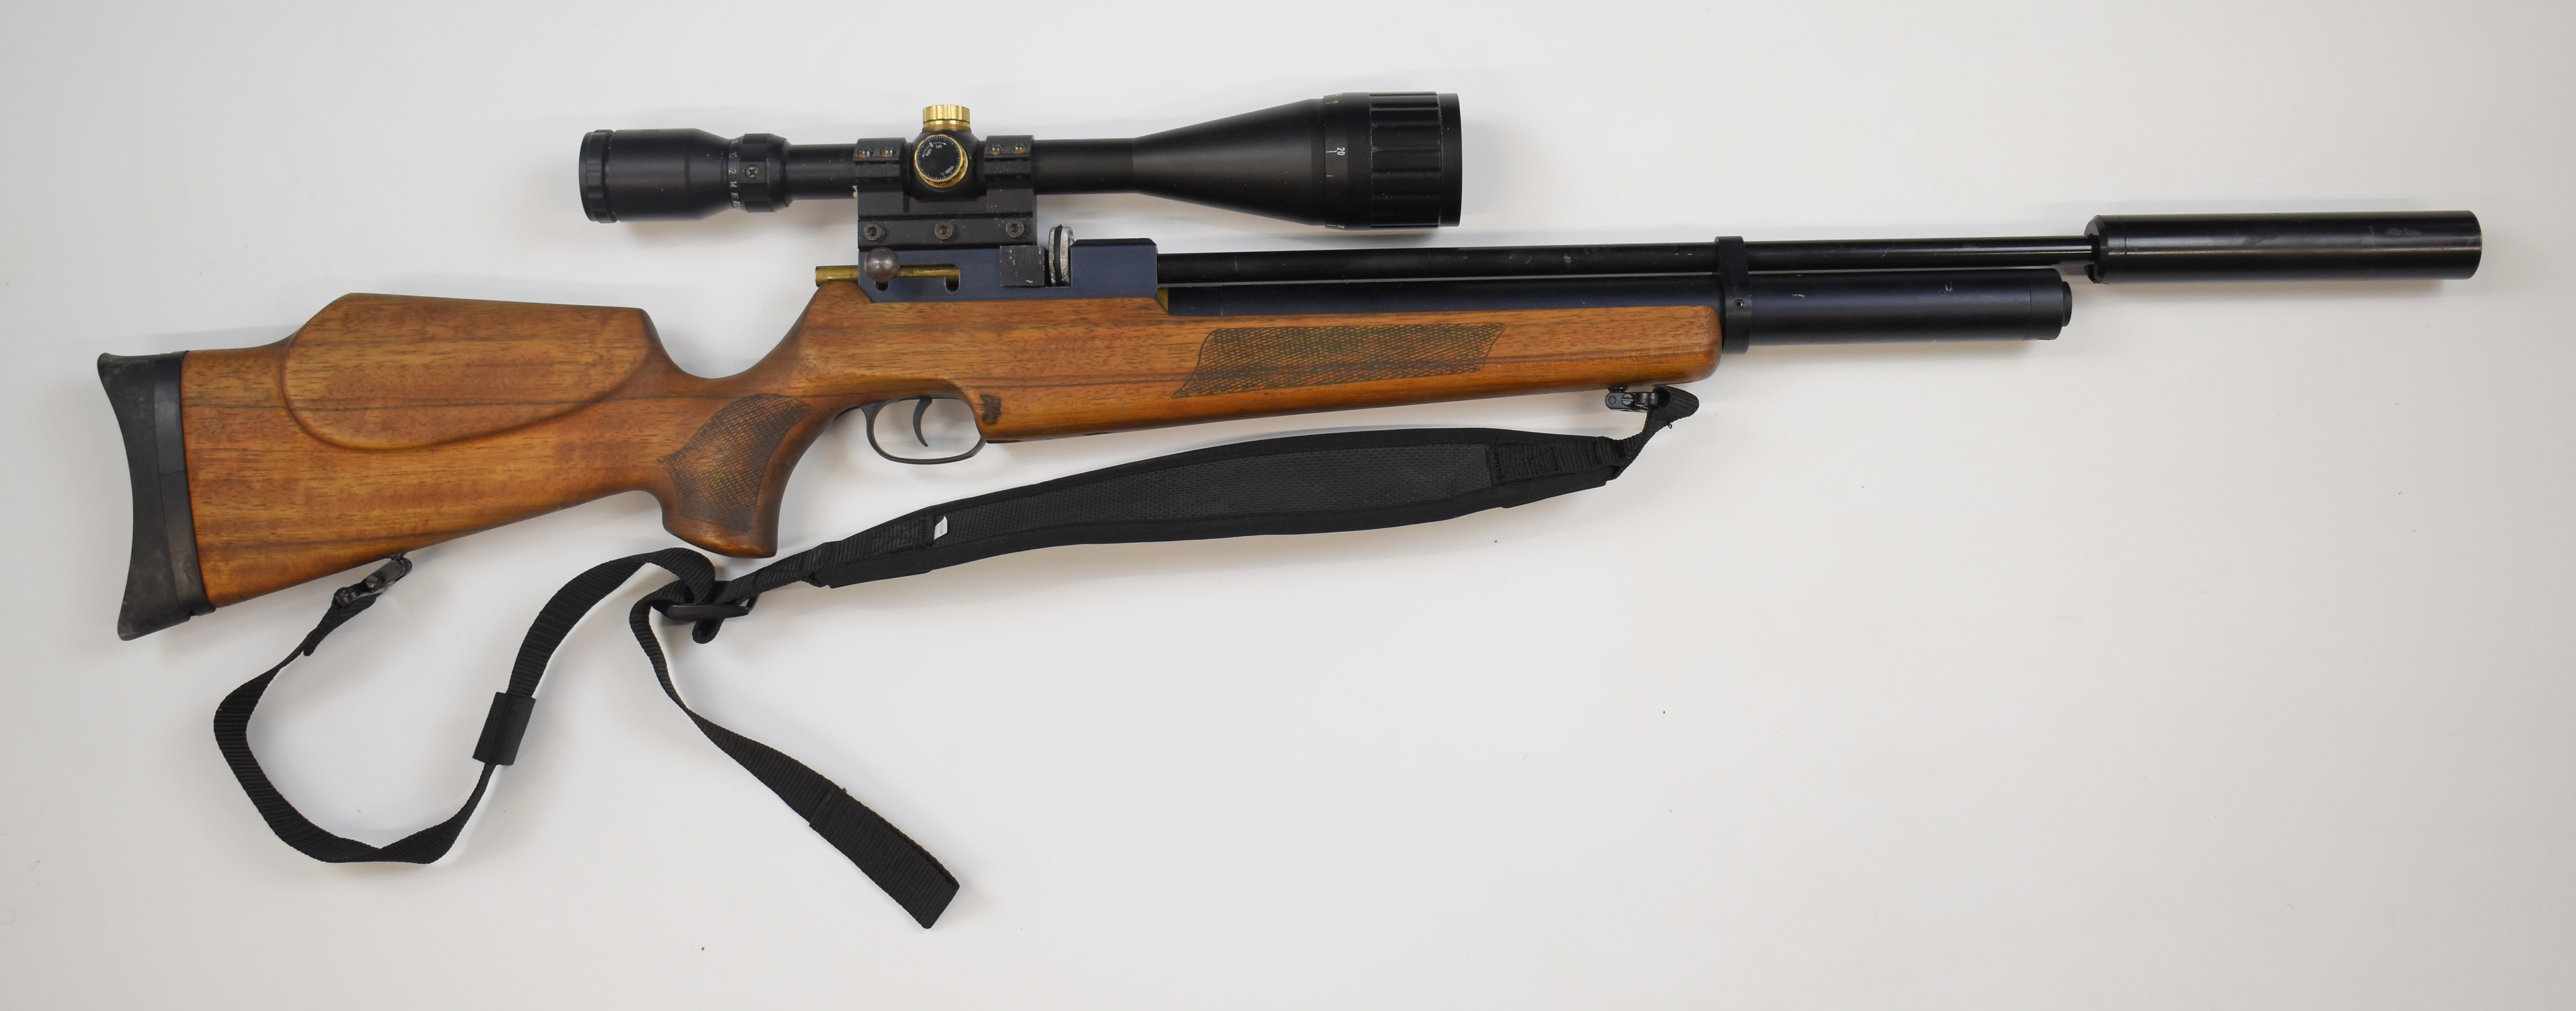 FX Logun Solo .22 PCP air rifle with chequered semi-pistol grip and forend, raised cheek piece, - Image 2 of 10